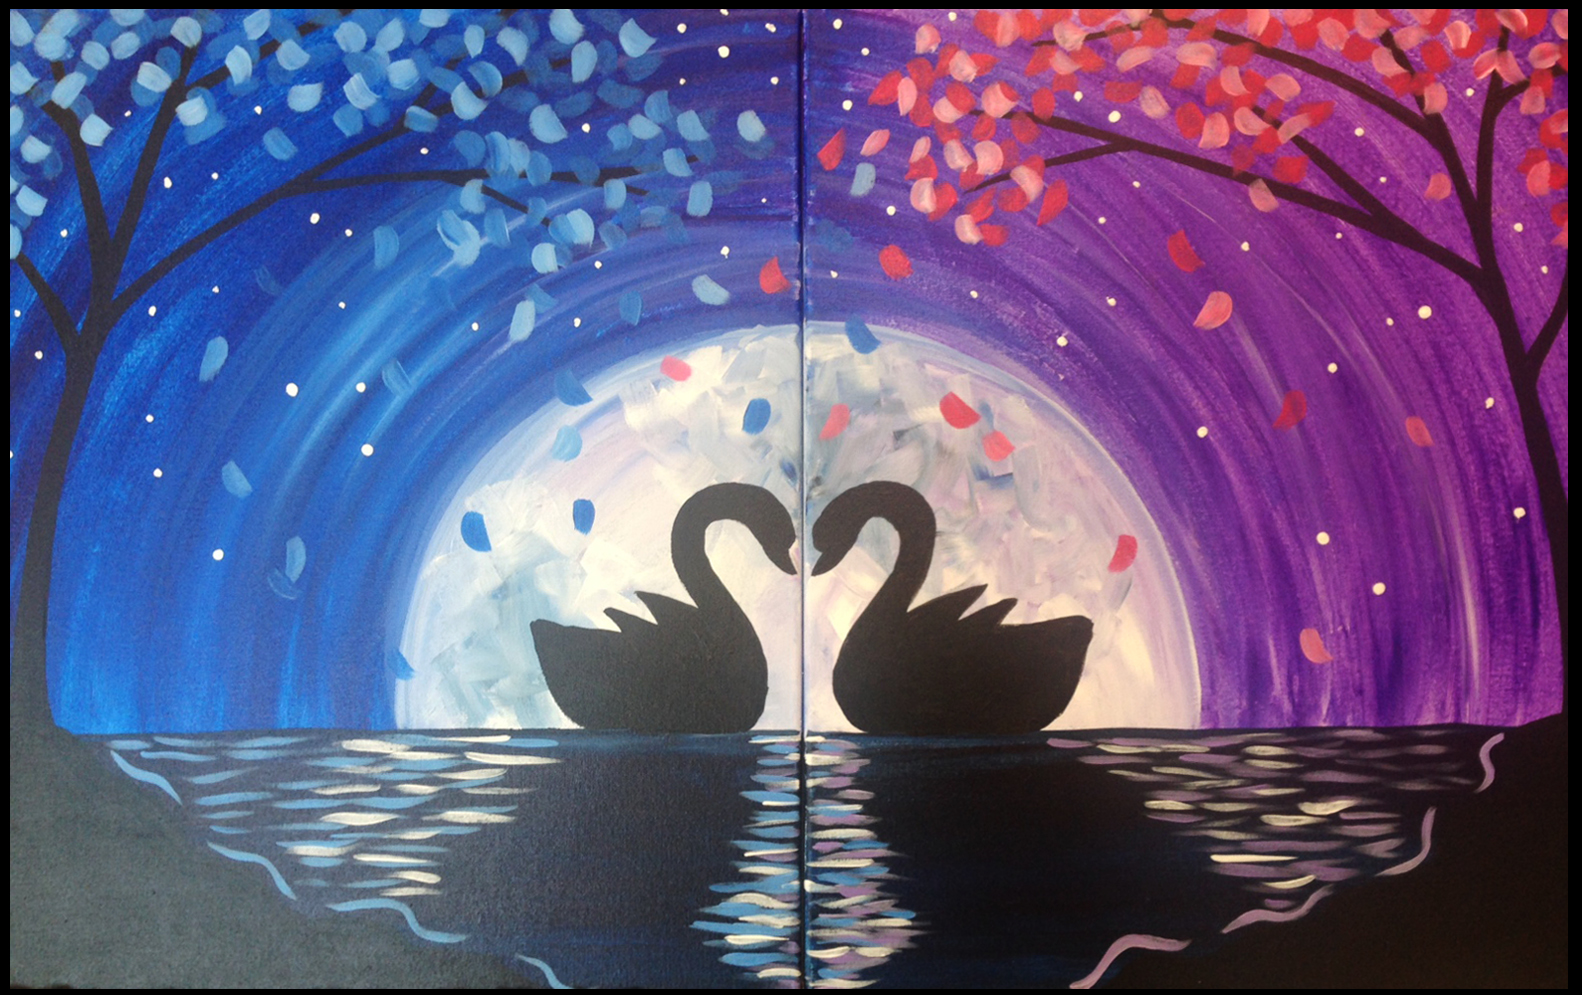 The Swan's Silhouette - Date Night - Pinot's Palette Painting